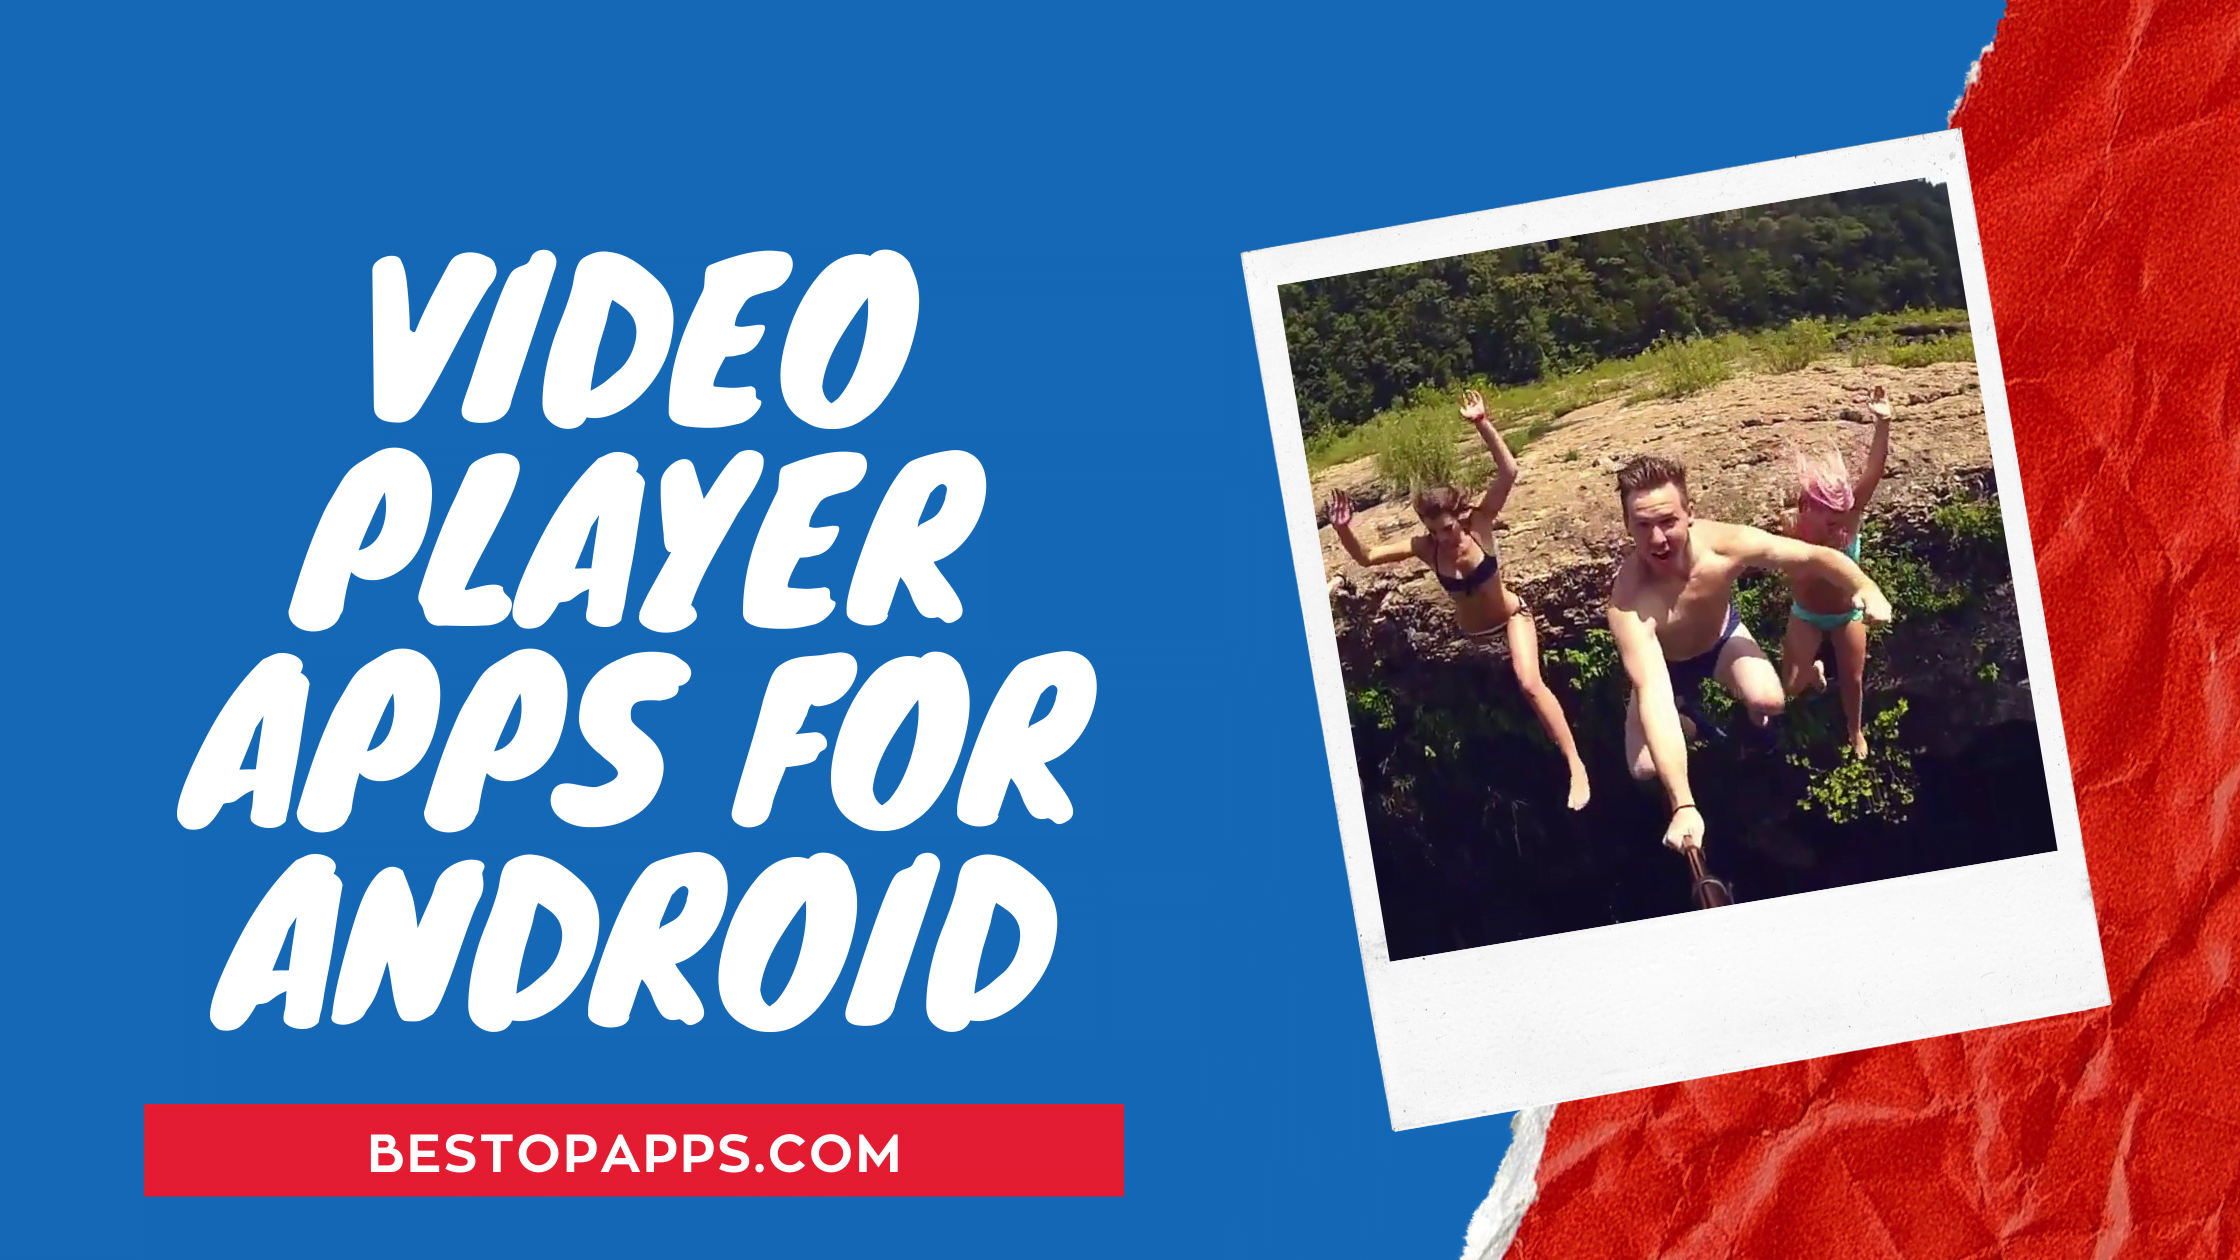 VIDEO PLAYER APPS FOR ANDROID